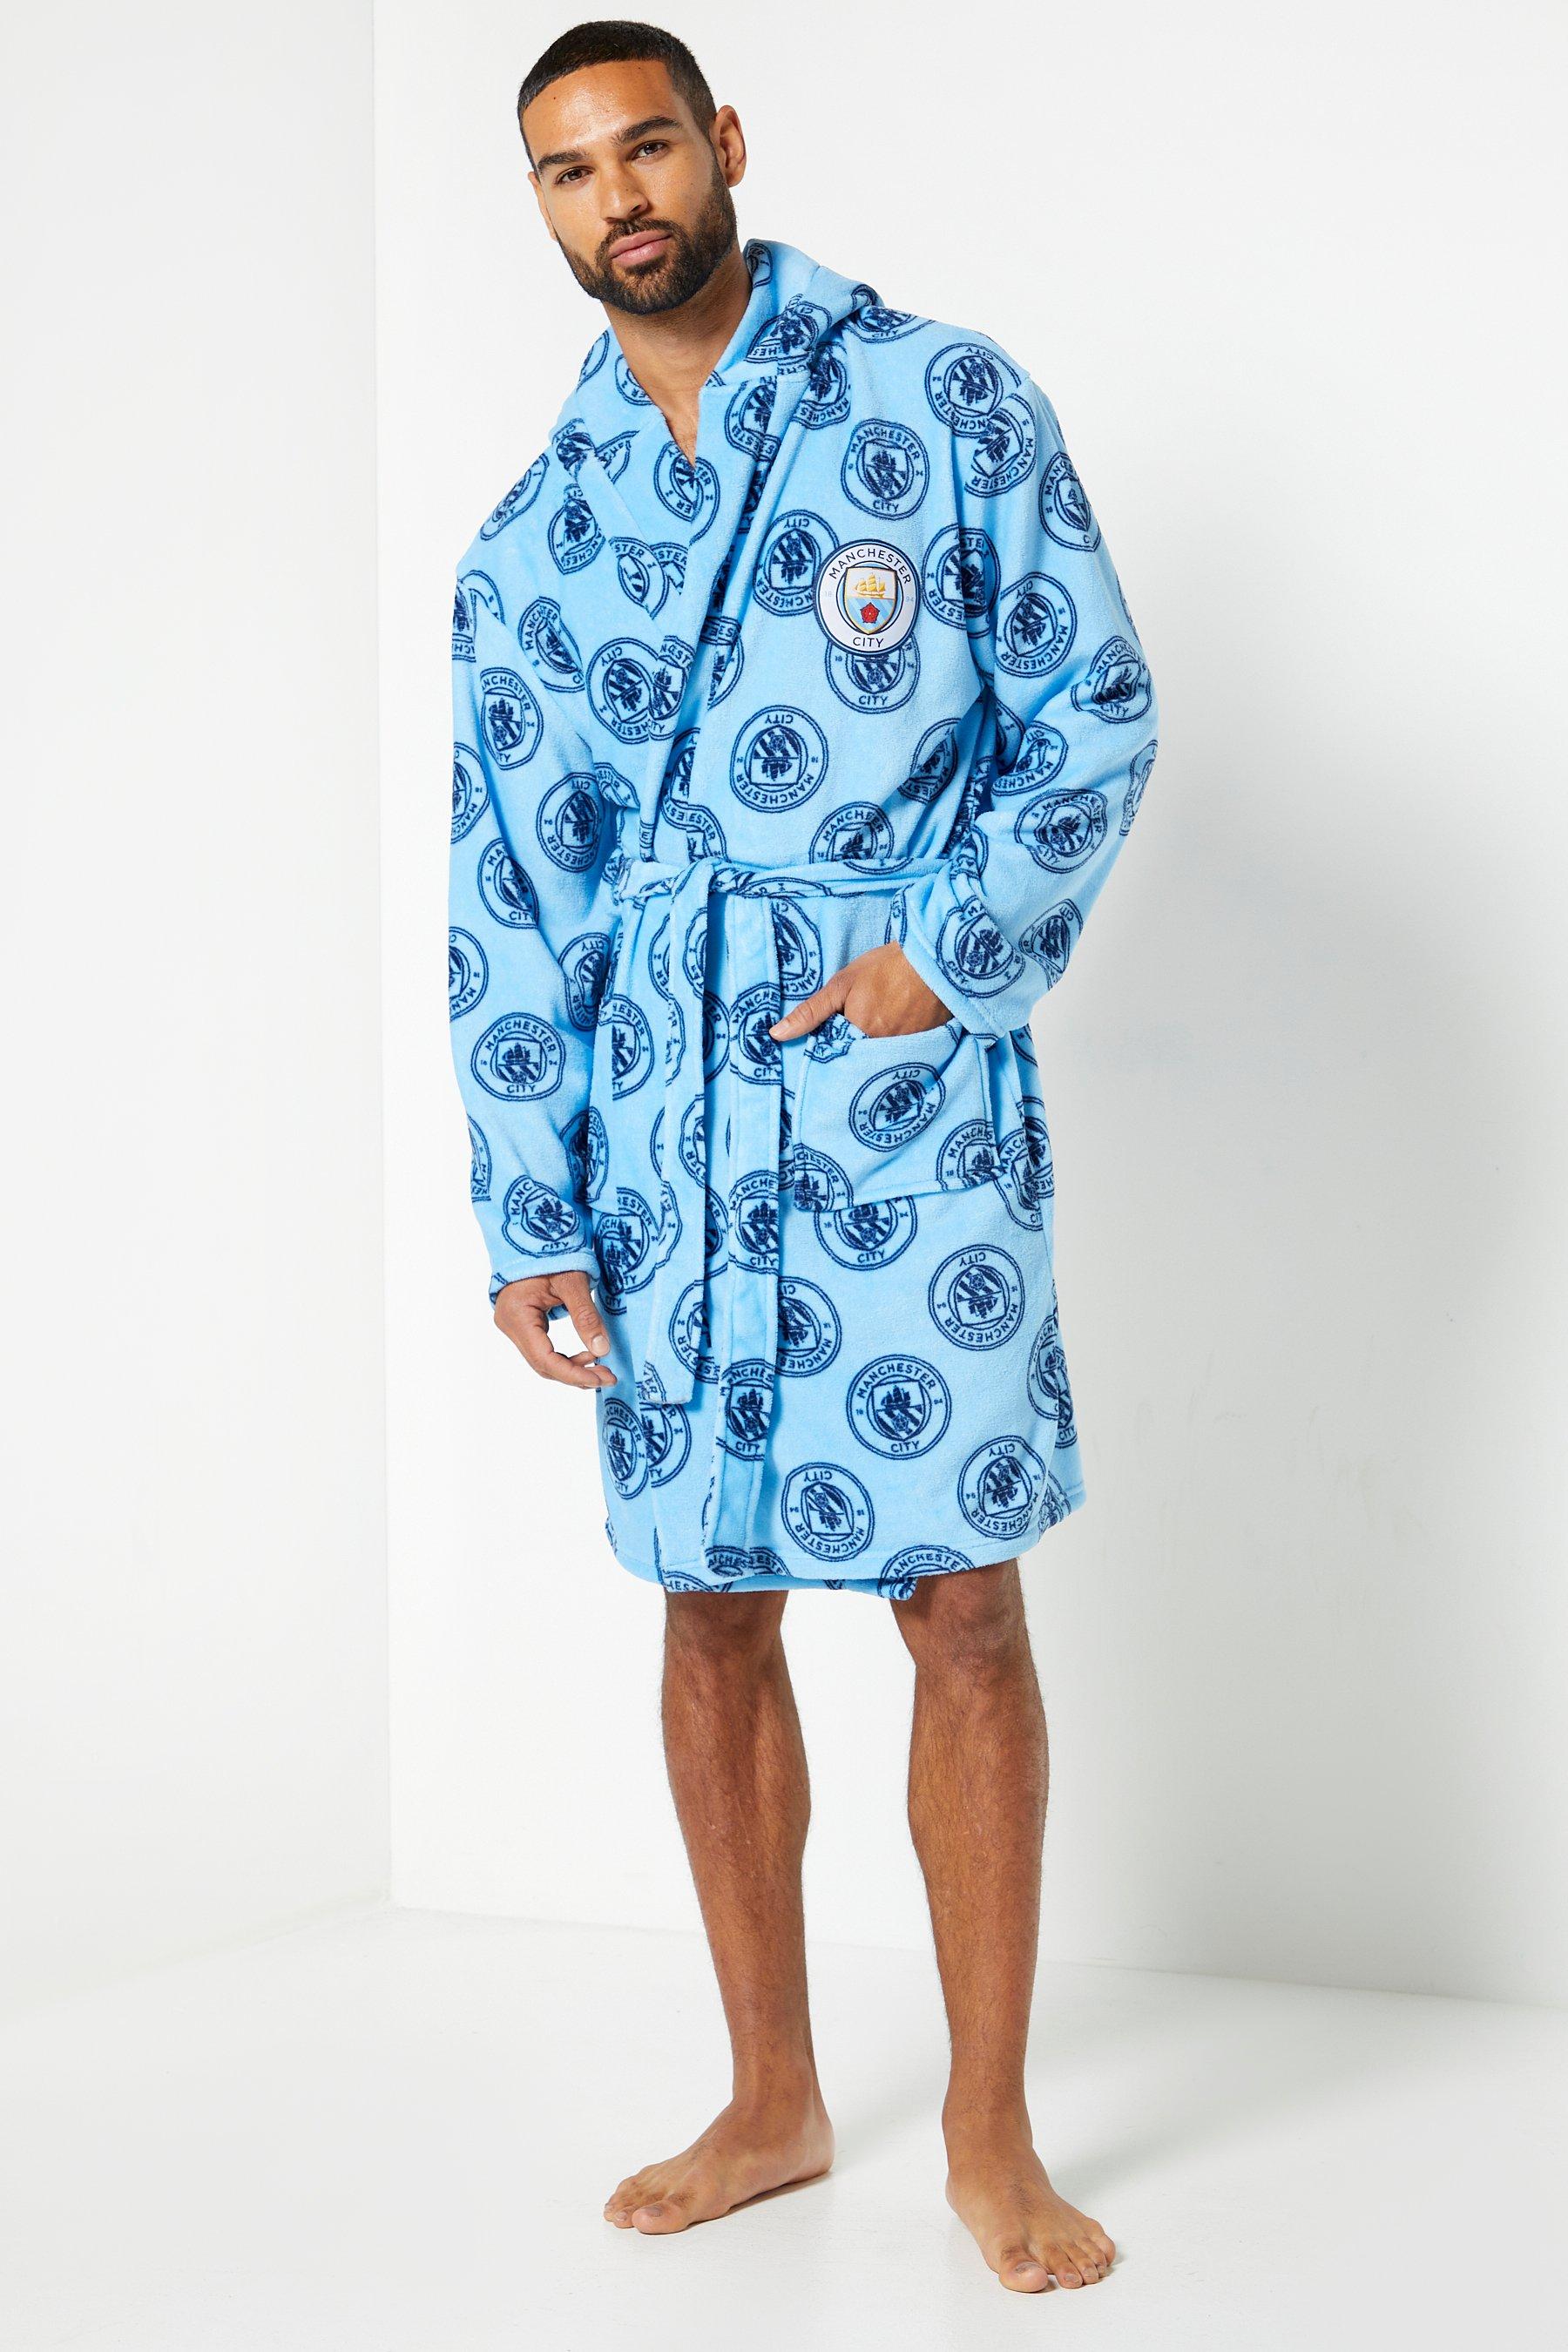 mens manchester city fc dressing gown - blue - size: small